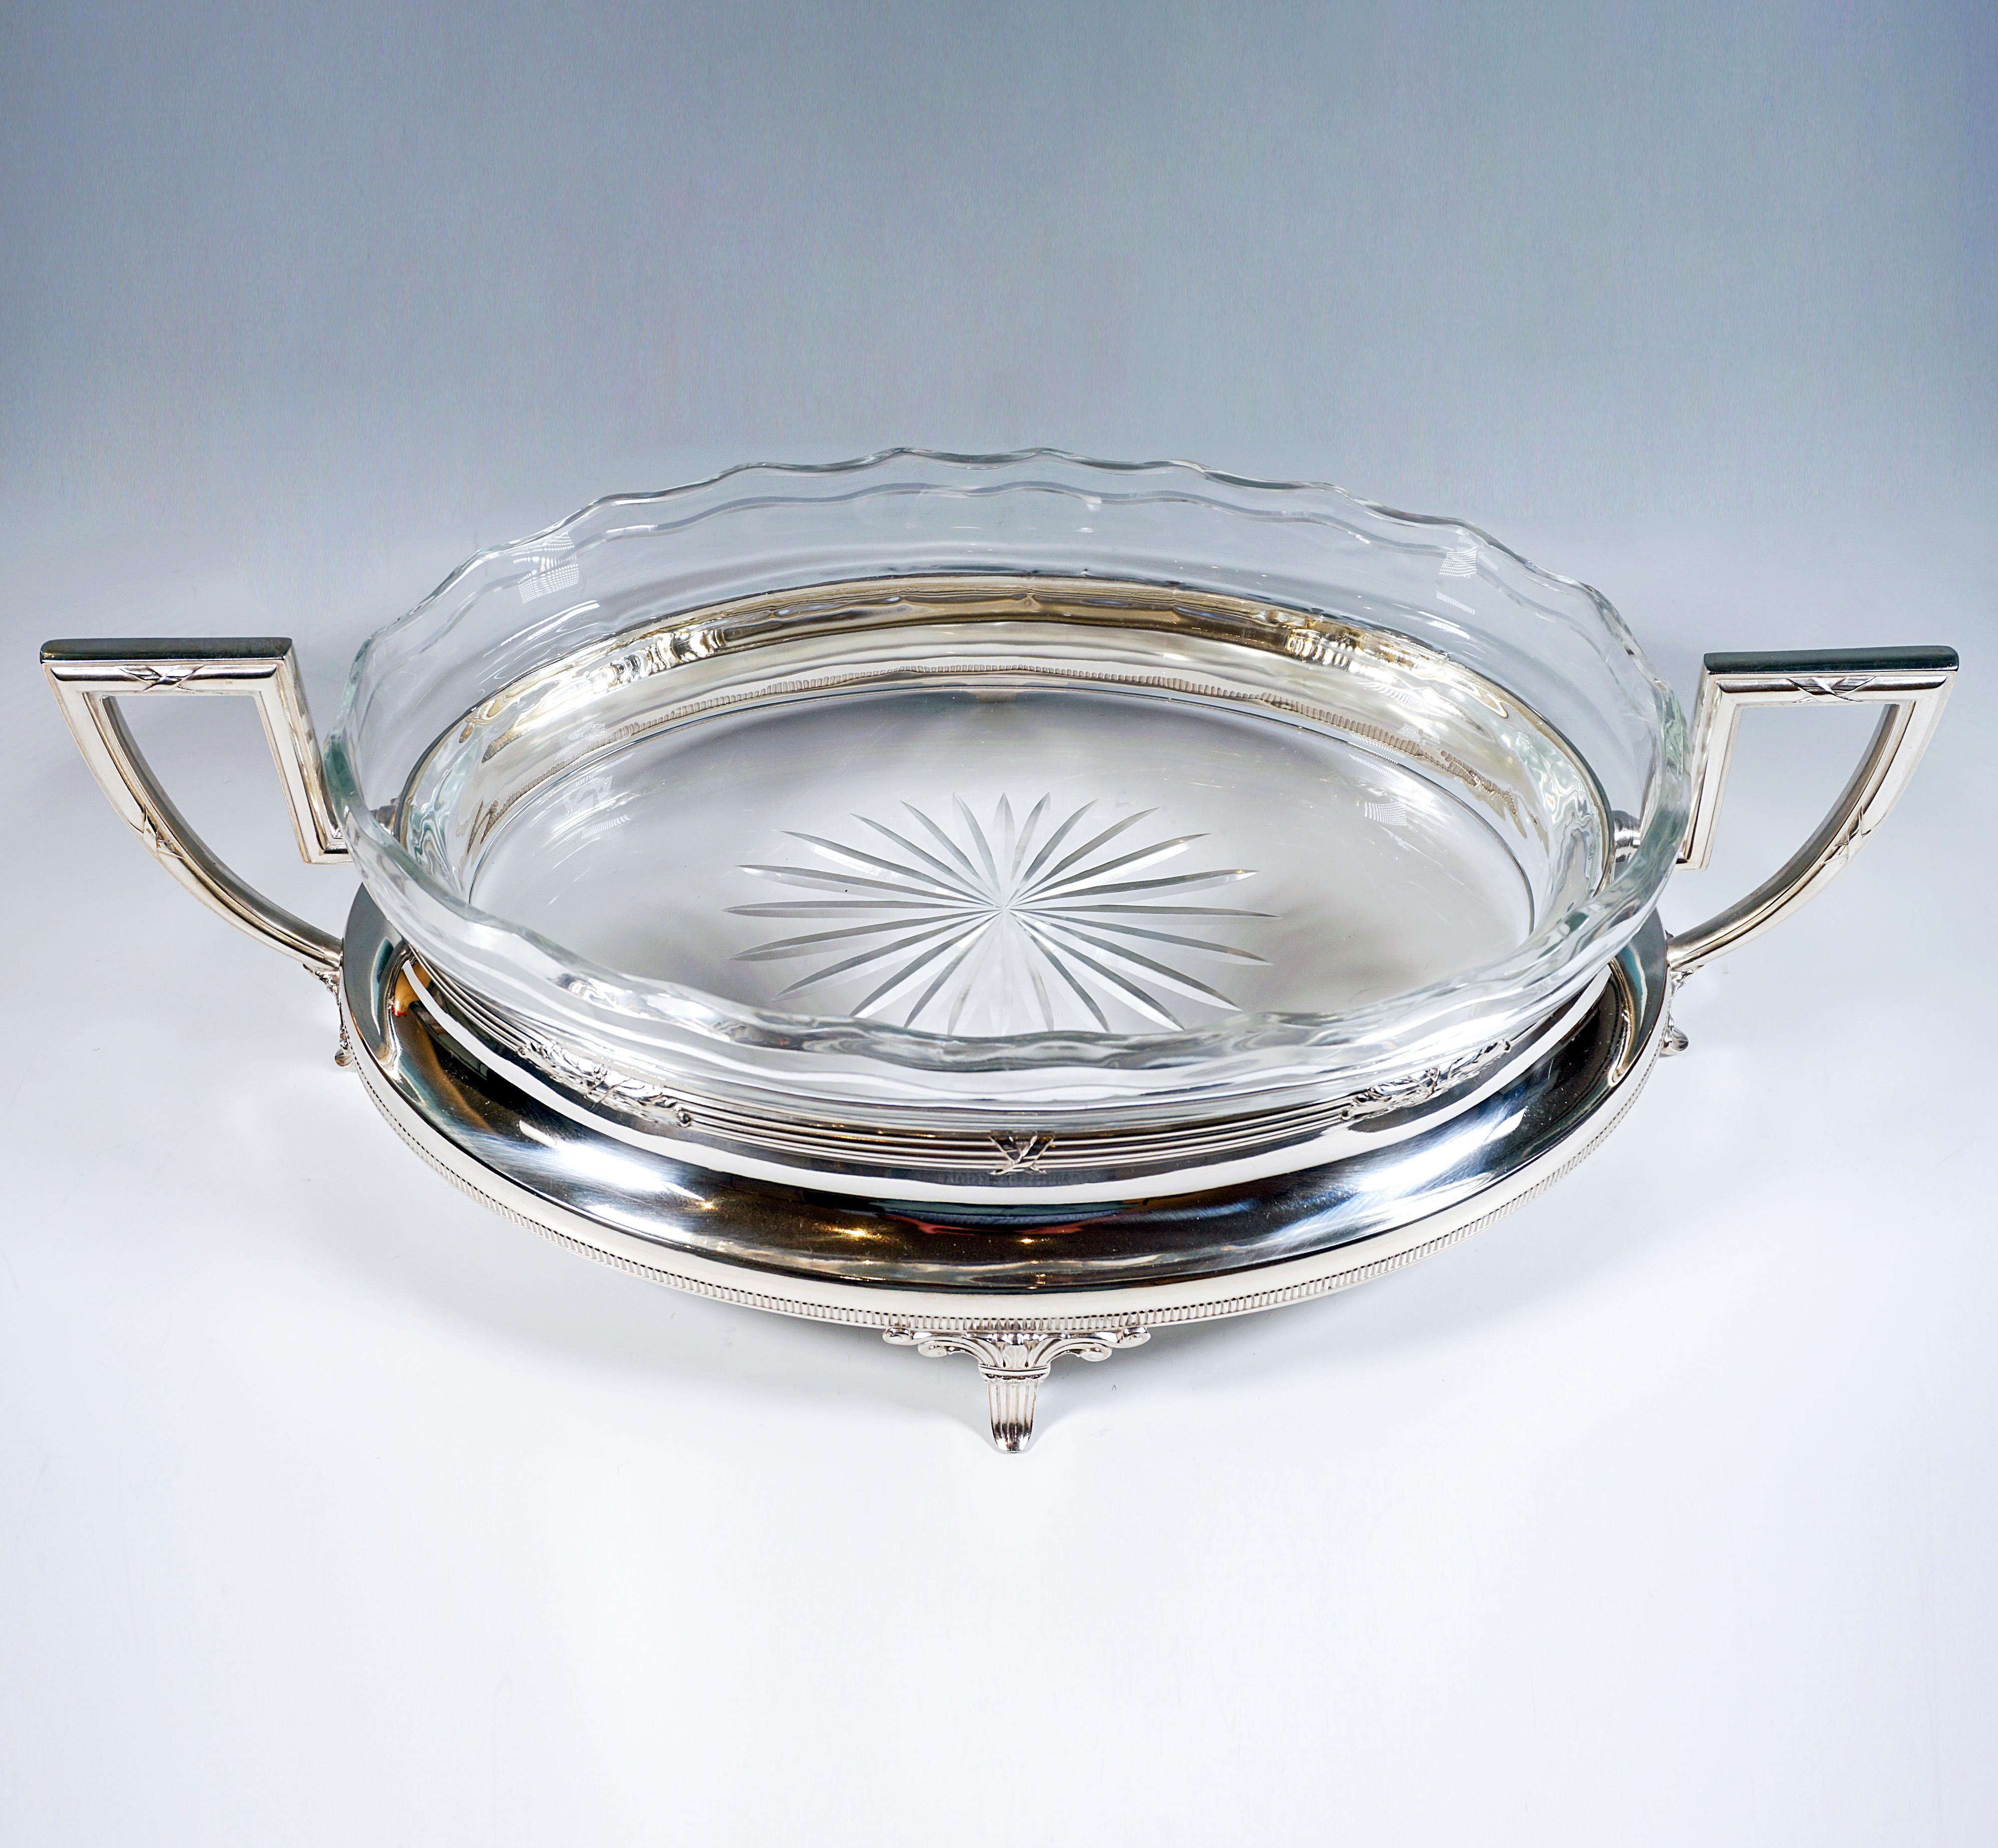 Faceted Art Nouveau Silver Jardinière With Waved Glass Liner Wilhelm Binder Germany 1900 For Sale